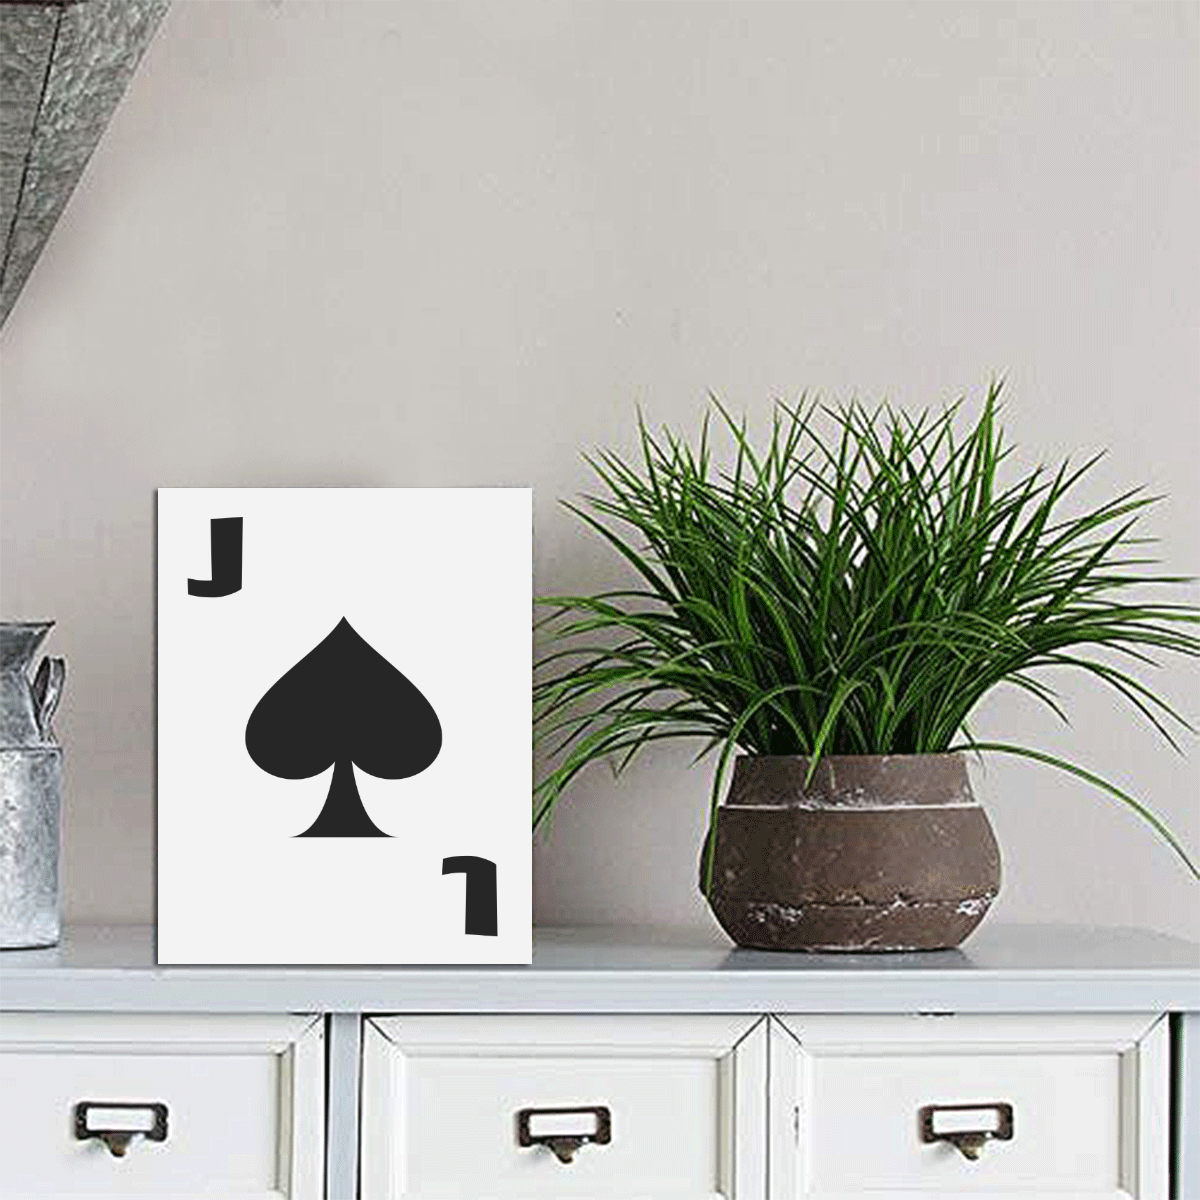 Playing Card Jack of Spades Photo Panel for Tabletop Display 6"x8"